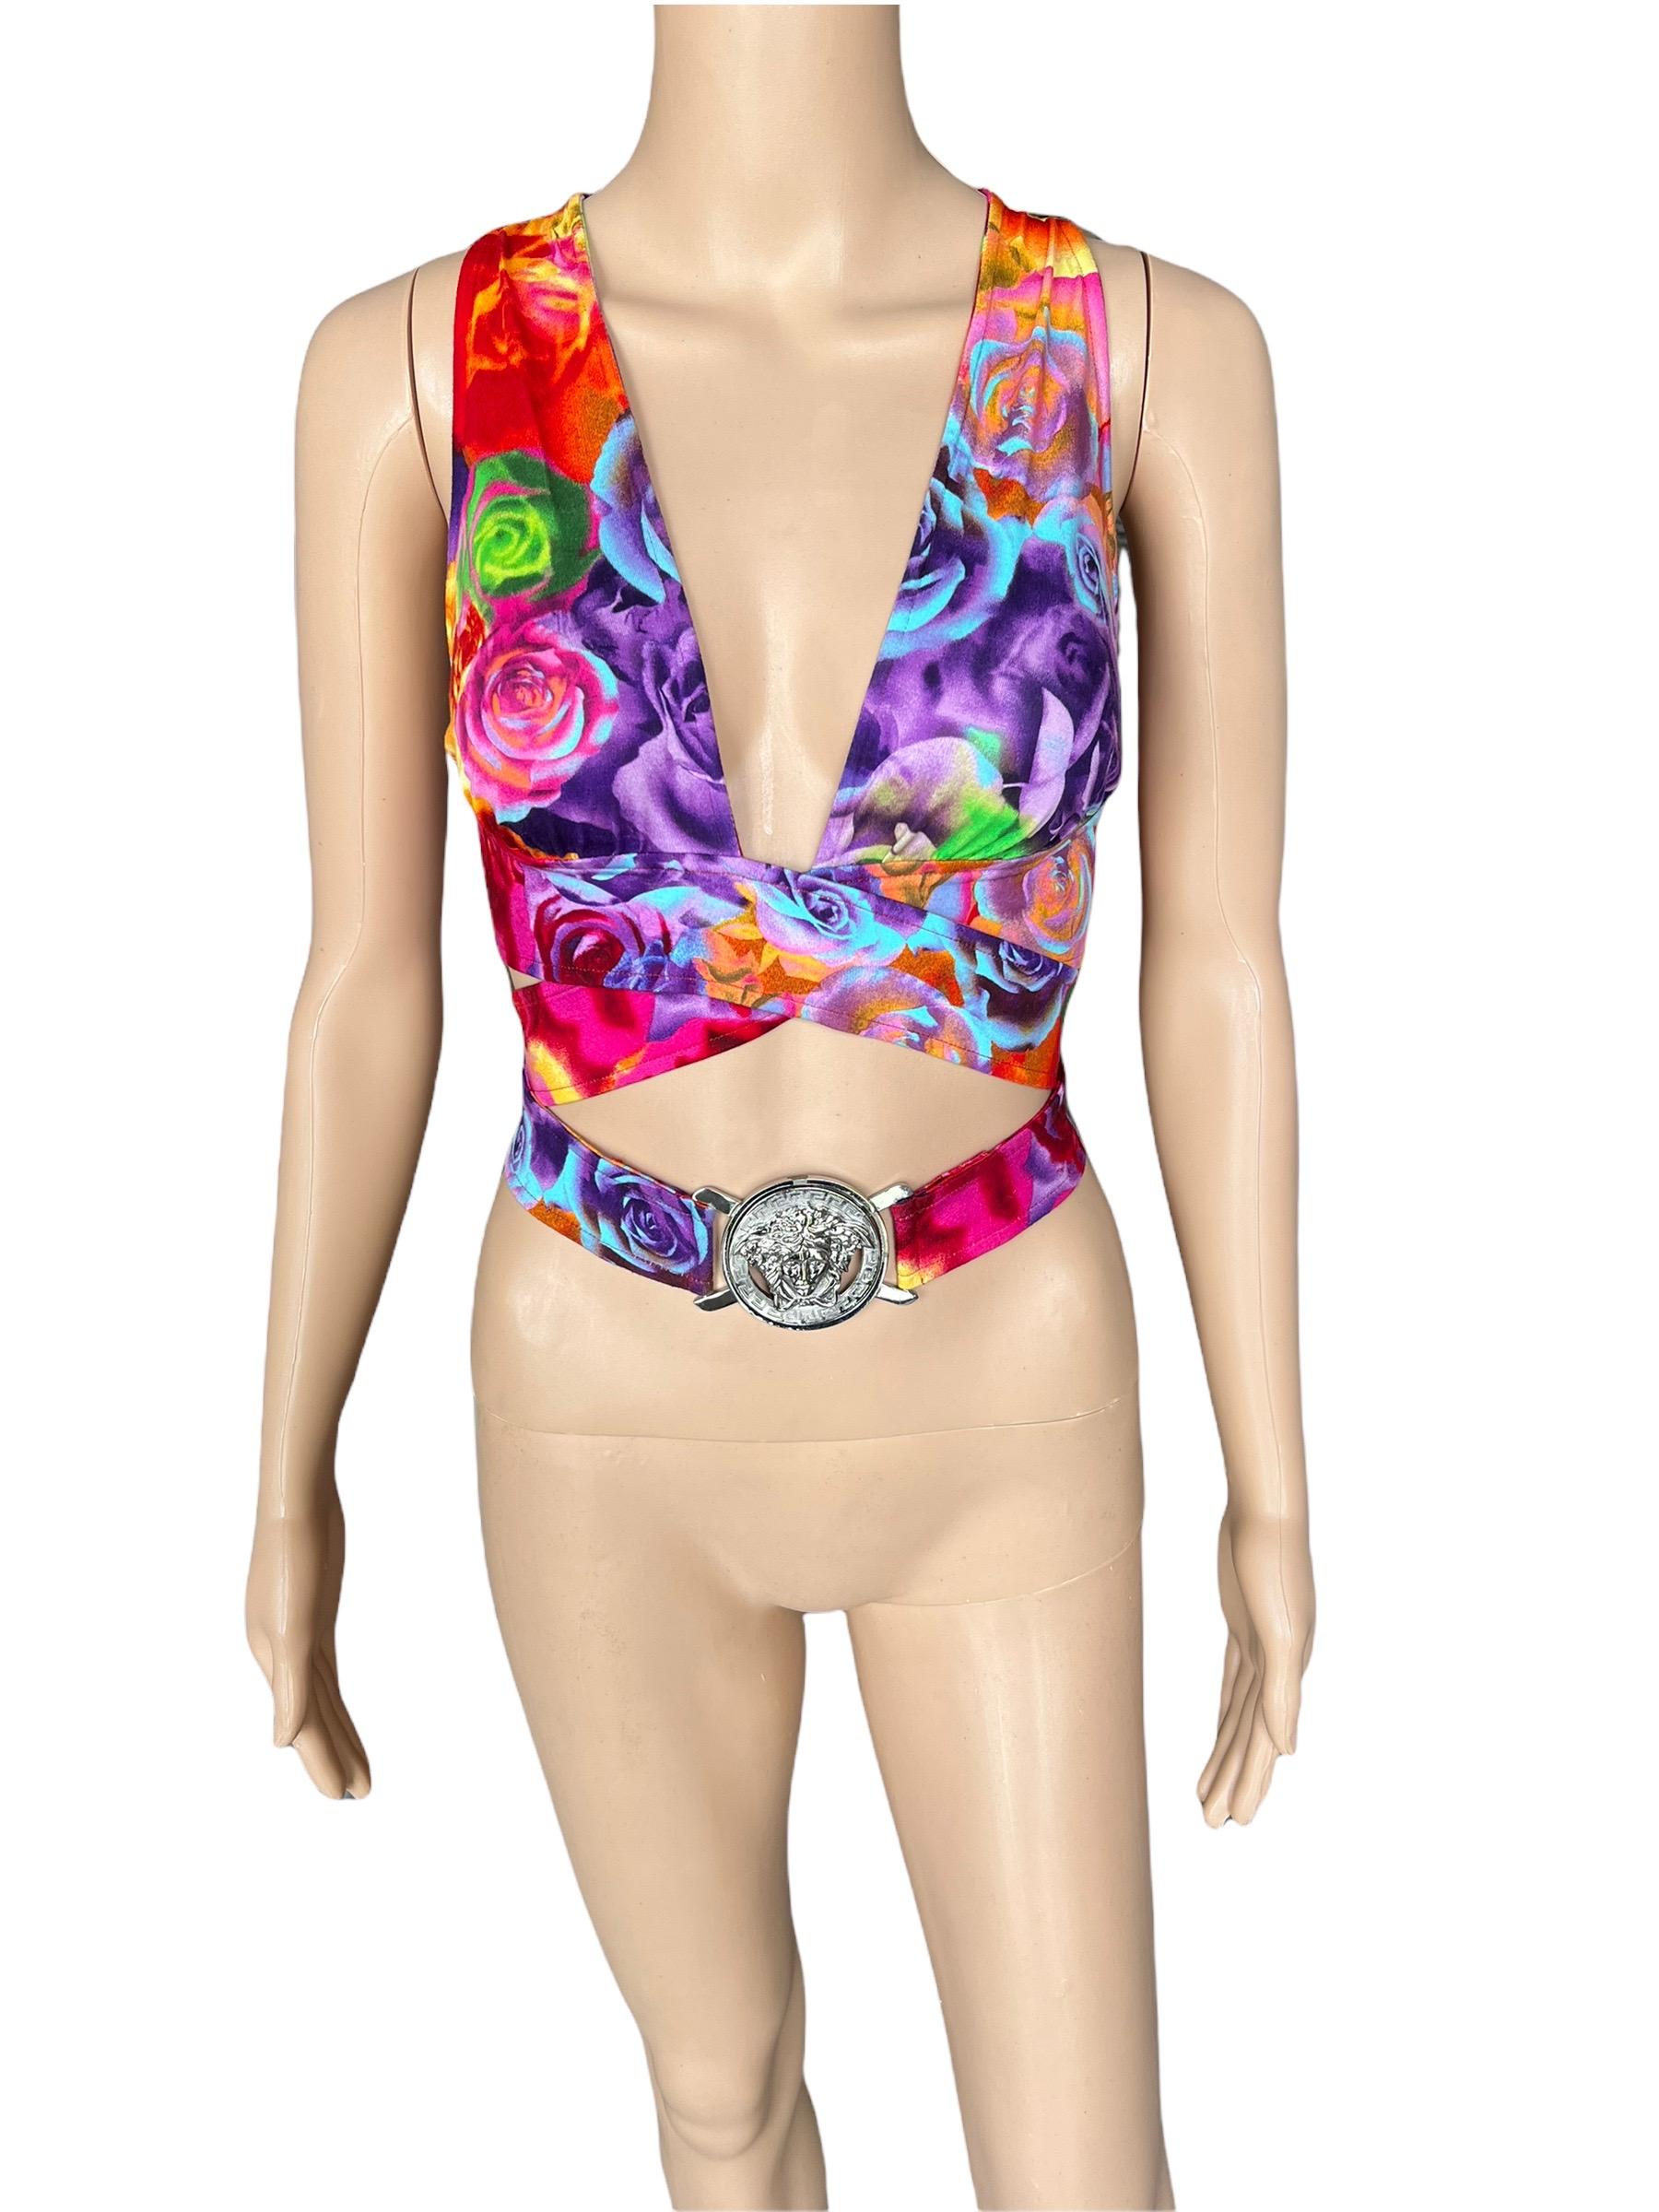 Versace S/S 2005 Plunging Wrap Crop Top IT 40

This is the actual top Shakira wore in Glamour magazine’s first ever Environmental issue!

Also seen on Kylie Jenner in a different colorway purchased from us as well!